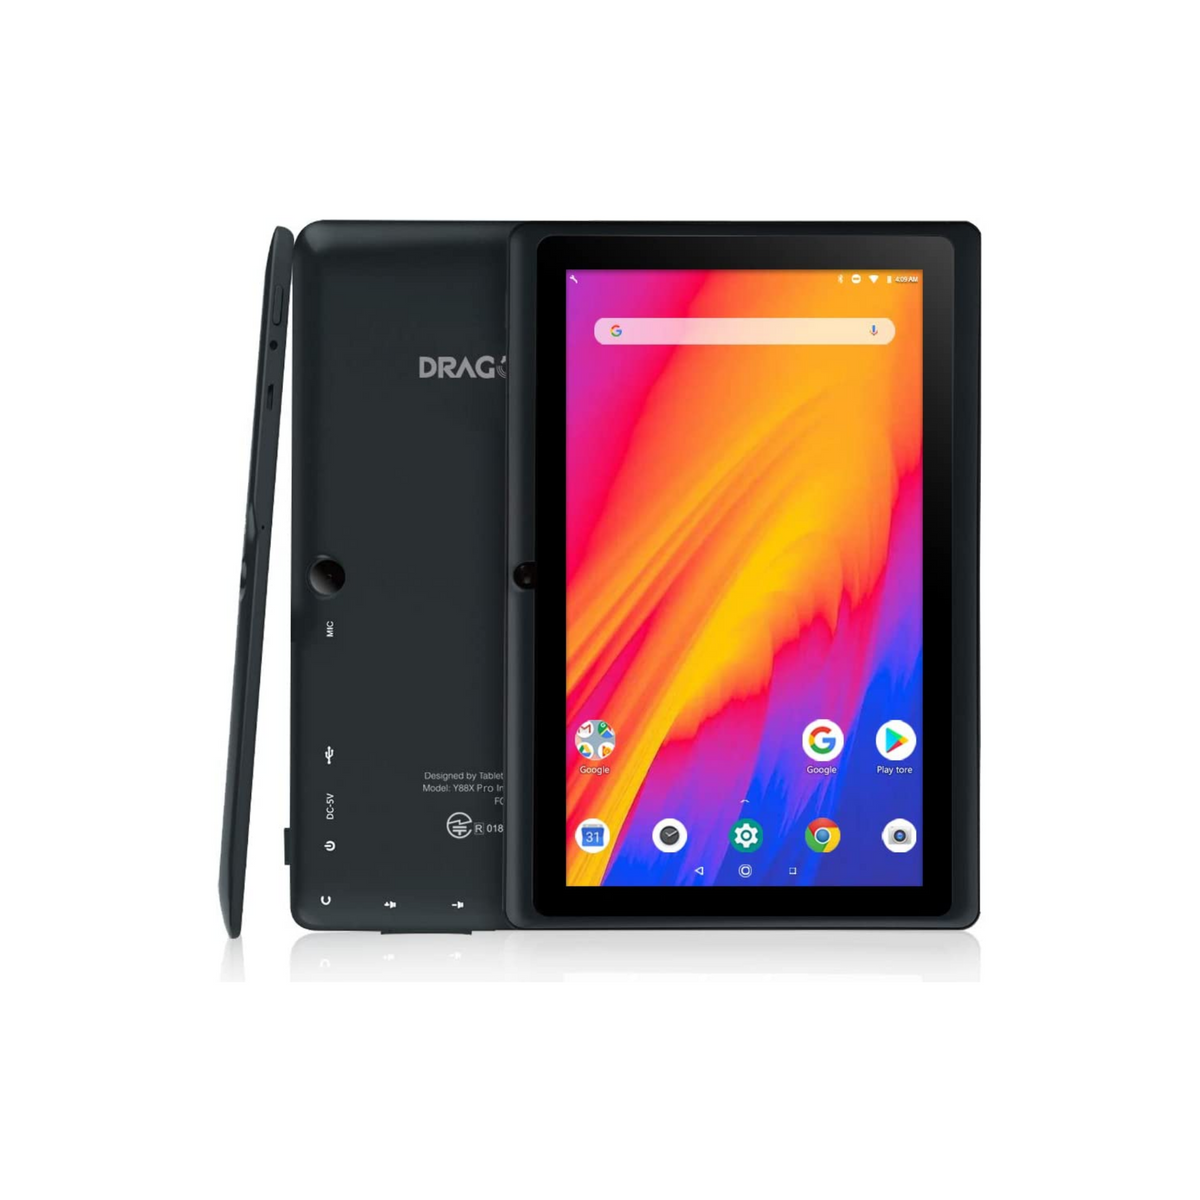 Dragon Touch 7 inch Tablet, Android 9.0 Pie, Quad-Core Processor, 2GB RAM 16GB Storage, 7 inch IPS HD Display, Dual Camera, WiFi Only, Black